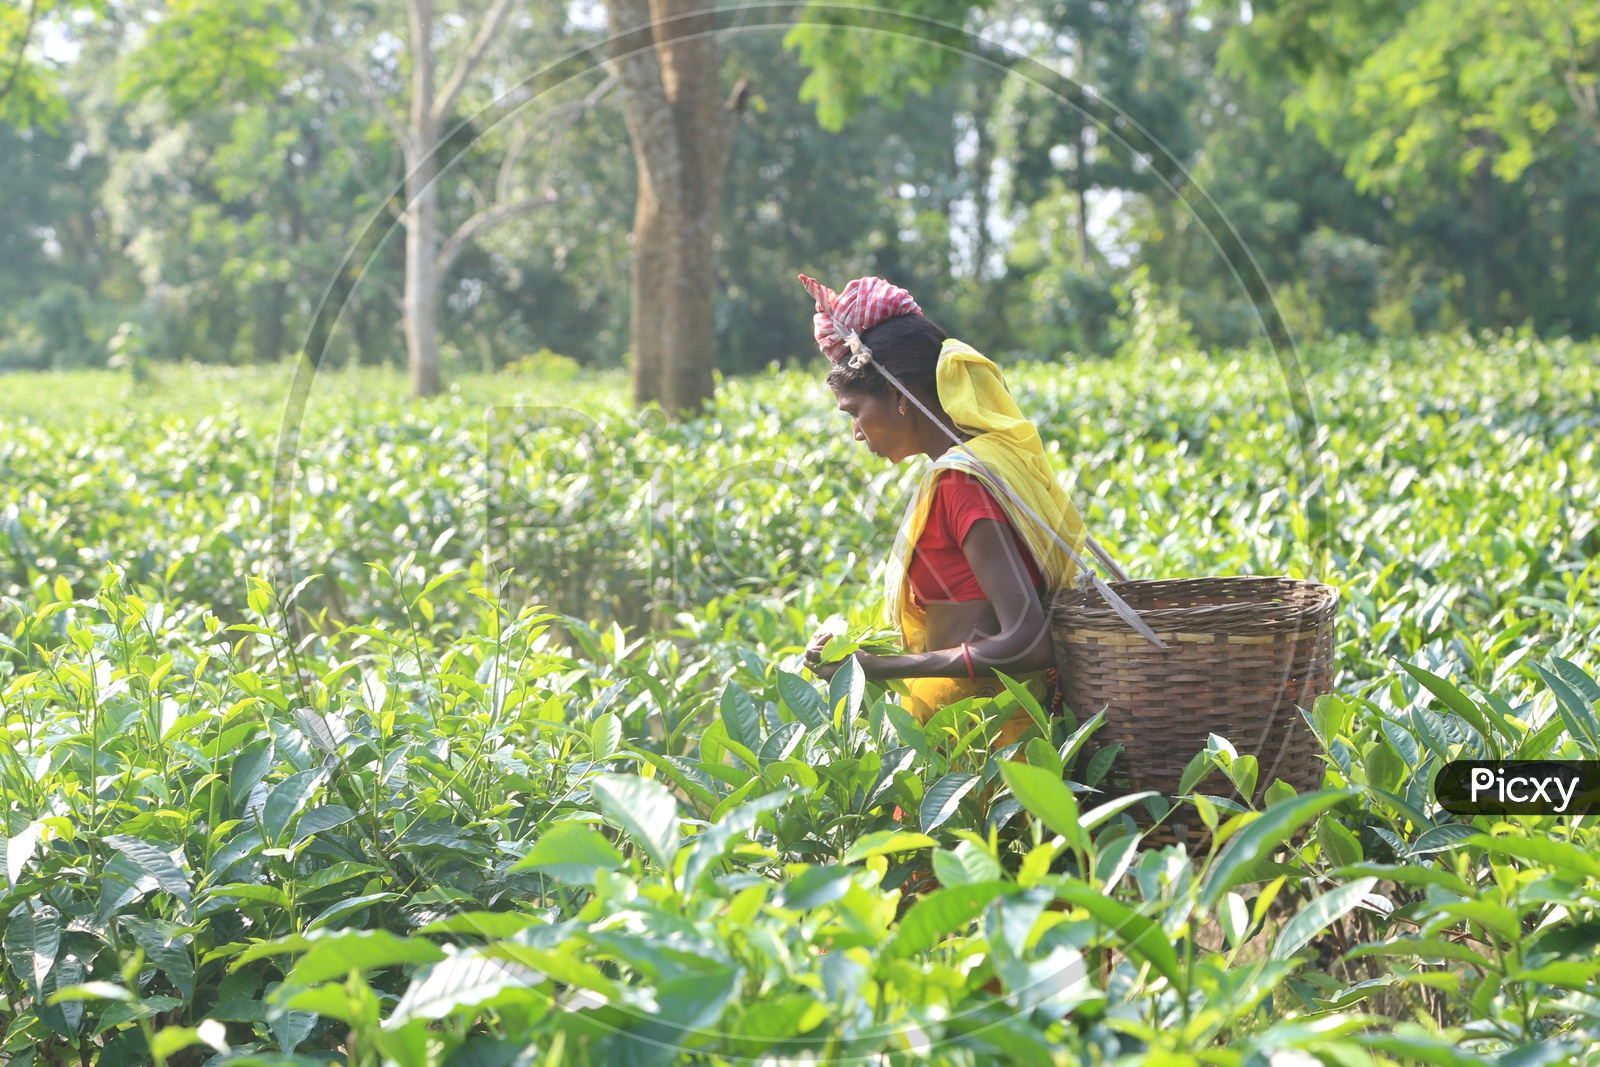 Woman Workers Plucking The Fresh Green Tea Leafs From Tea Plants In a Plantation in Assam